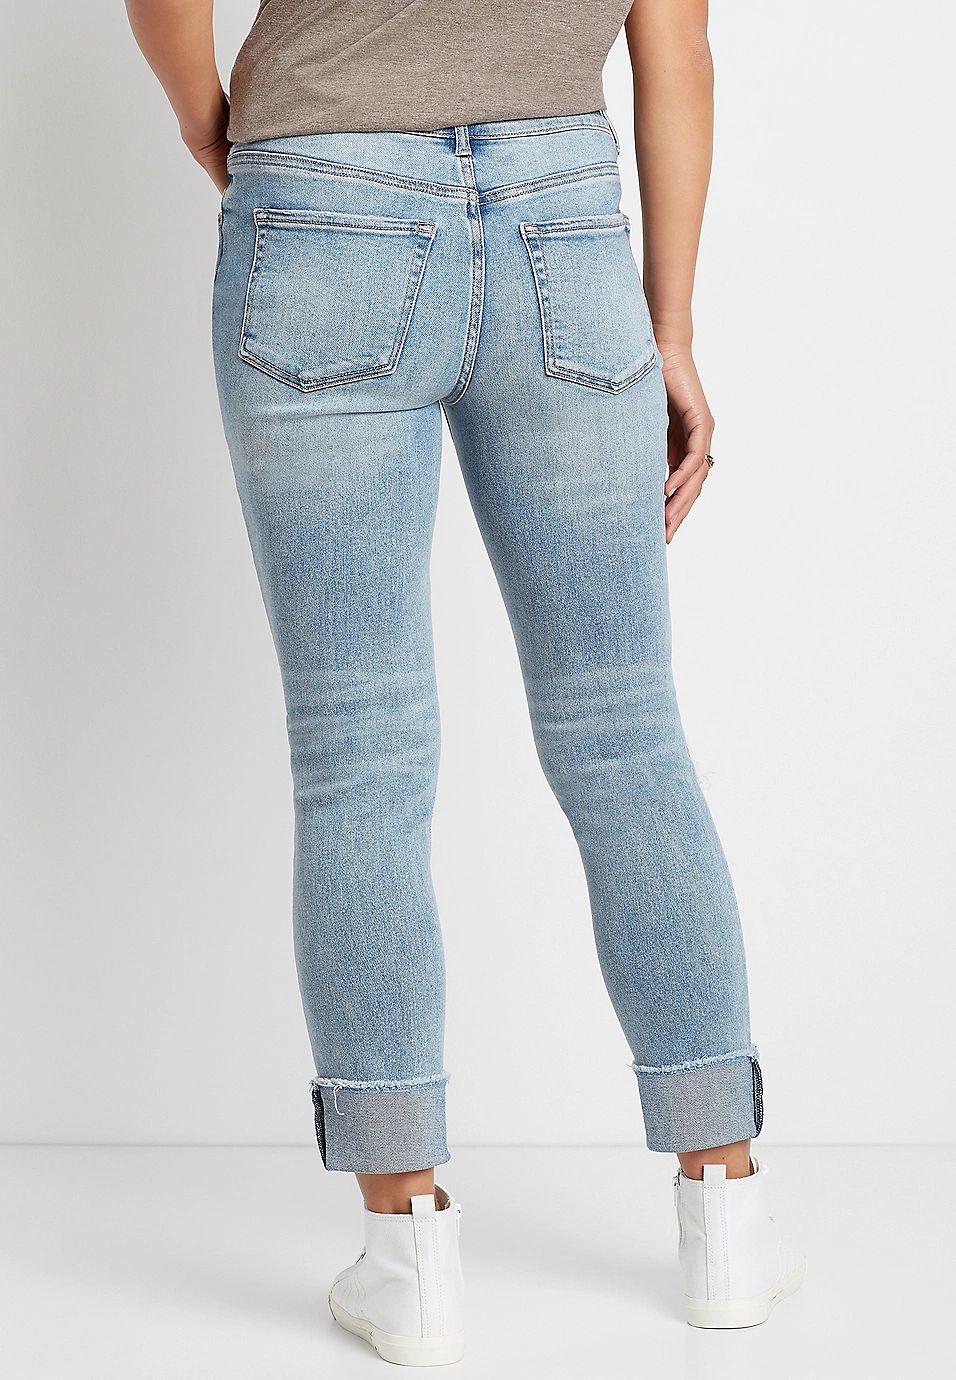 m jeans by maurices™ Vintage Slim Straight High Rise Ripped Jean | Maurices